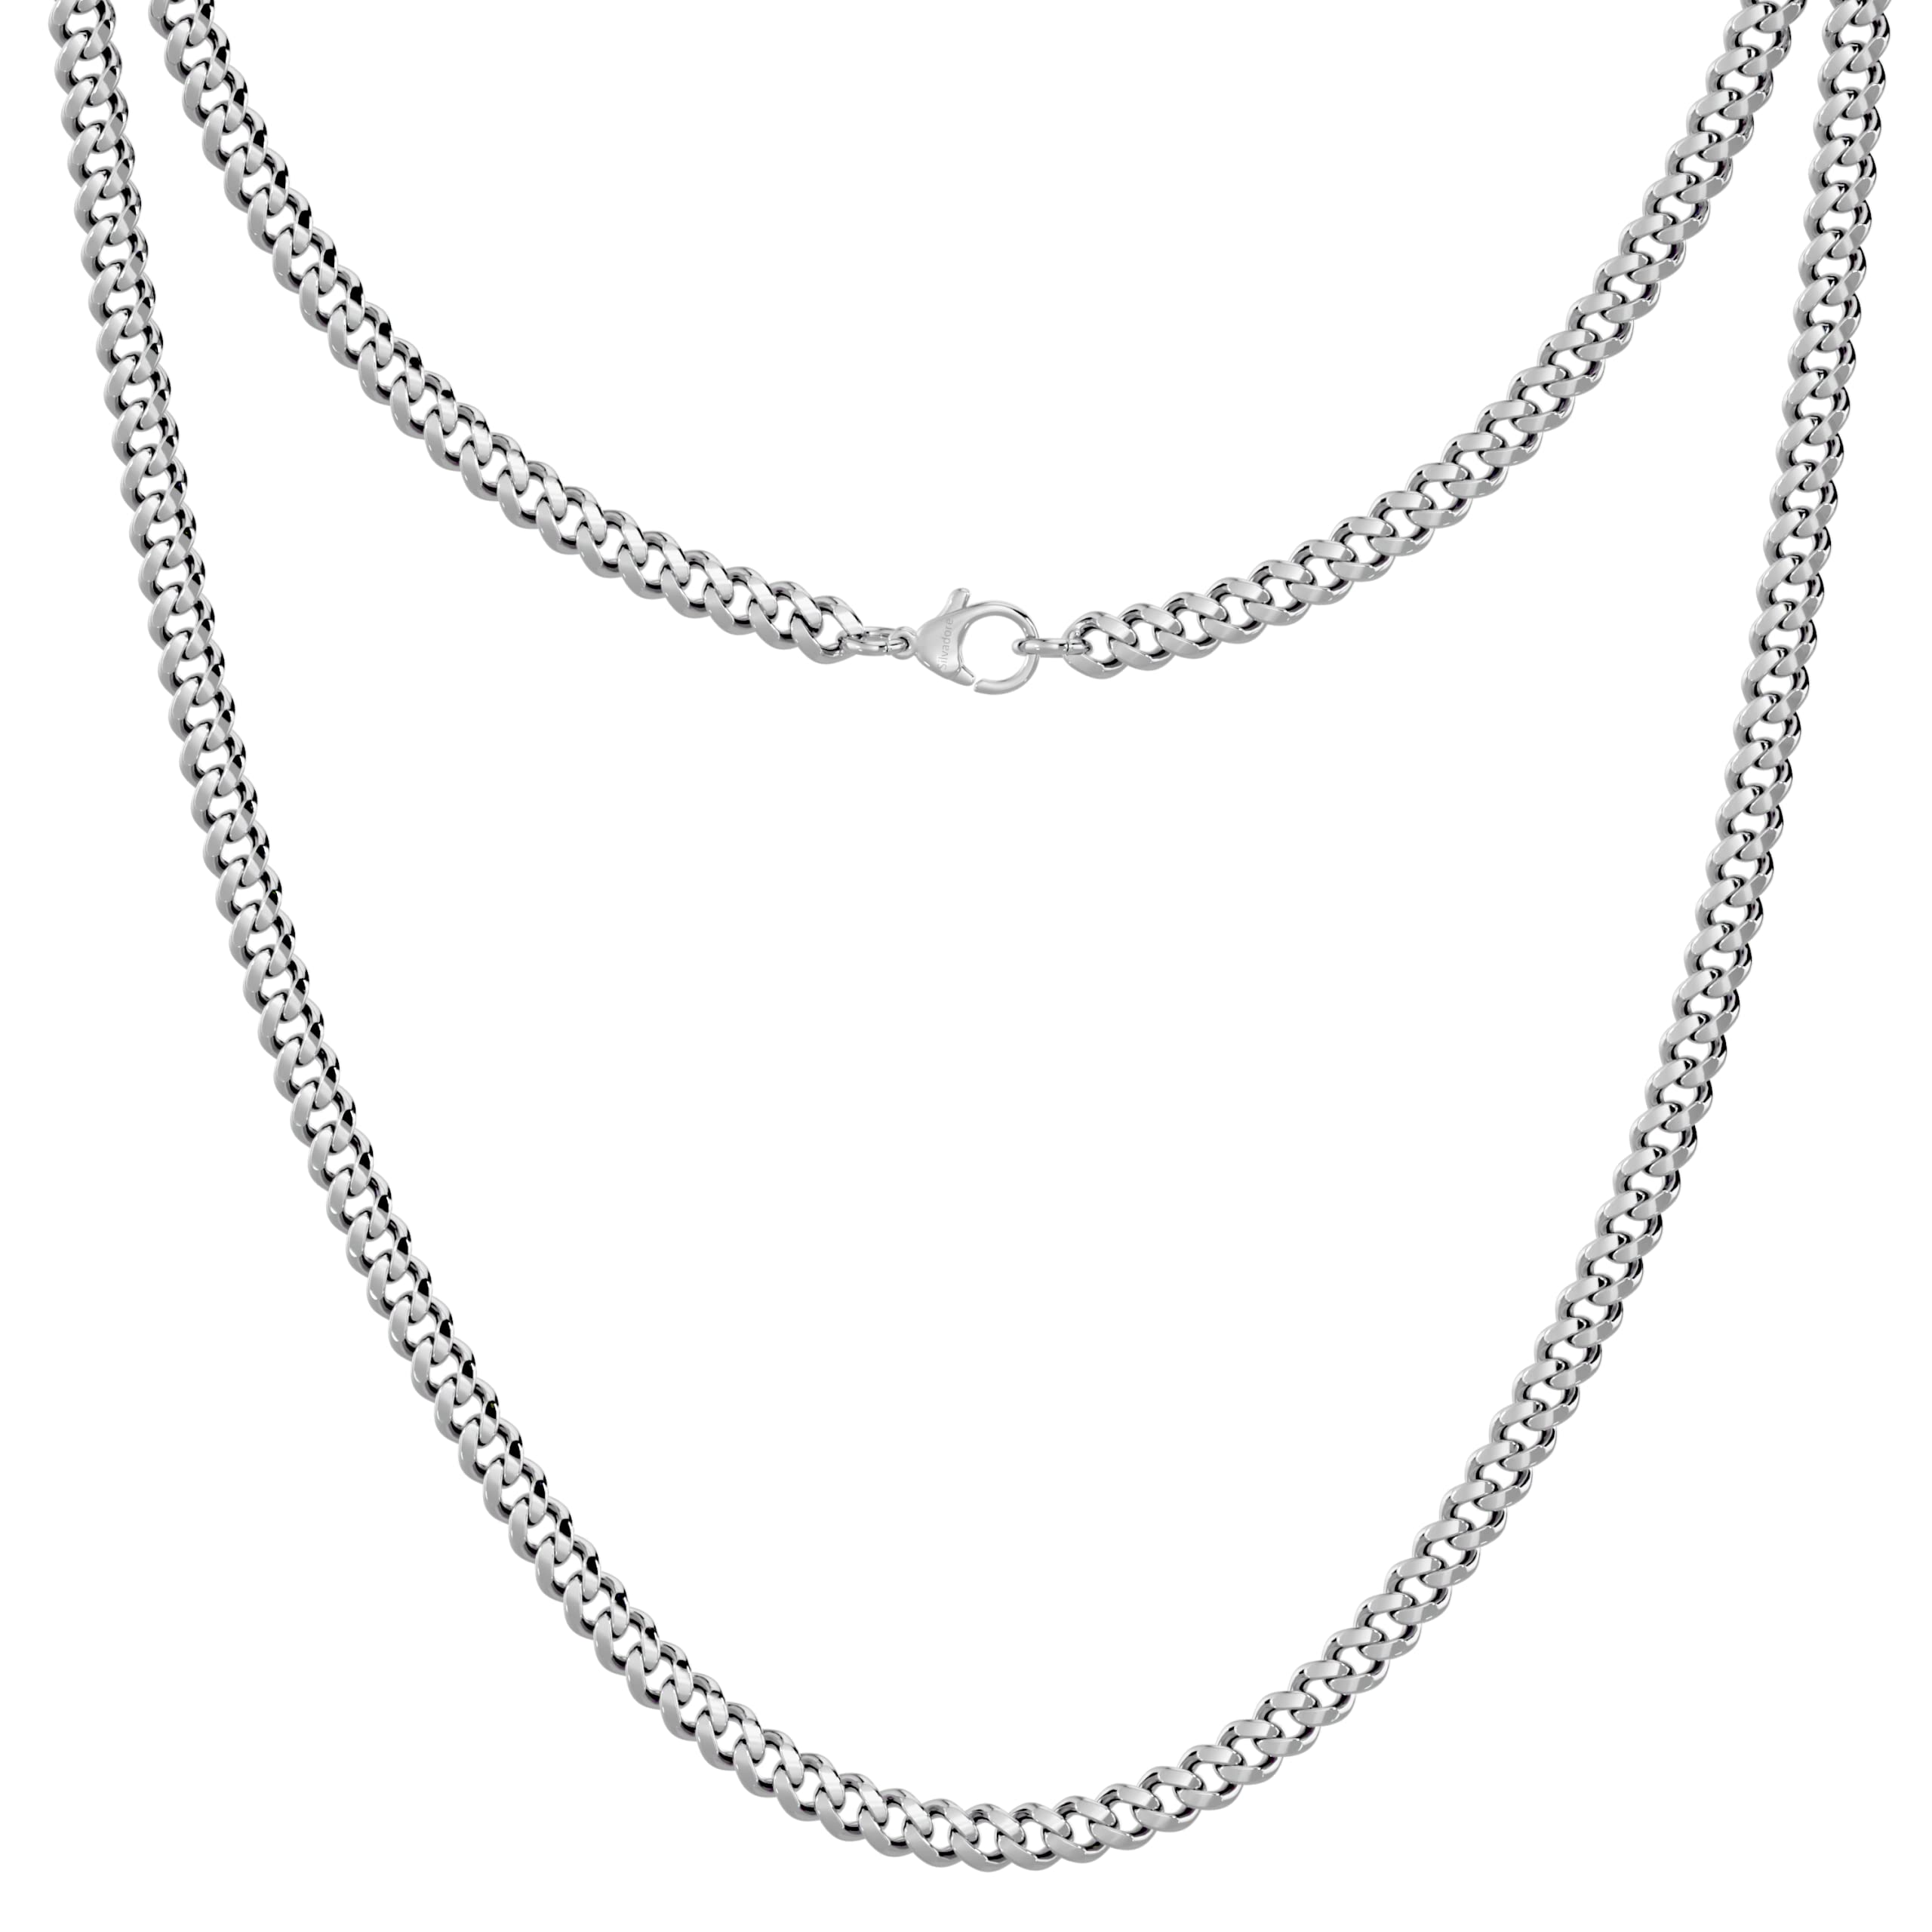 Silvadore 4mm CURB Cuban Chain For Men Necklace - Silver Stainless Steel Tone - Diamond Cut Miami Link Jewelry Women Male Guys Man - Strong Heavy Military Dog Tag Neck Gift - 18 20 22 24 26 36 inch UK